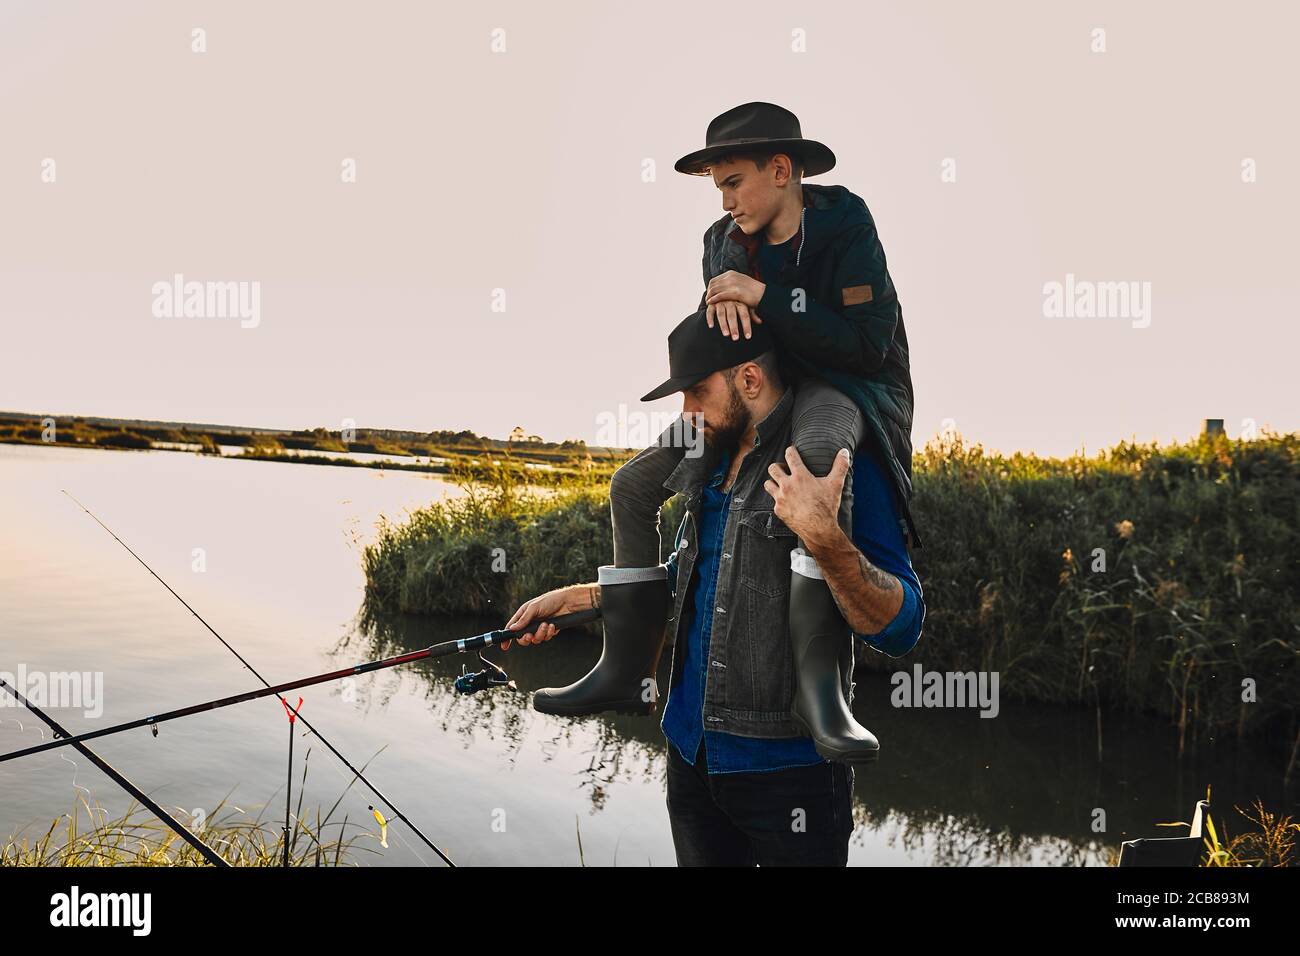 https://c8.alamy.com/comp/2CB893M/father-and-son-have-fun-while-fishing-teen-boy-sit-on-father-shoulders-and-they-together-look-on-water-intently-2CB893M.jpg